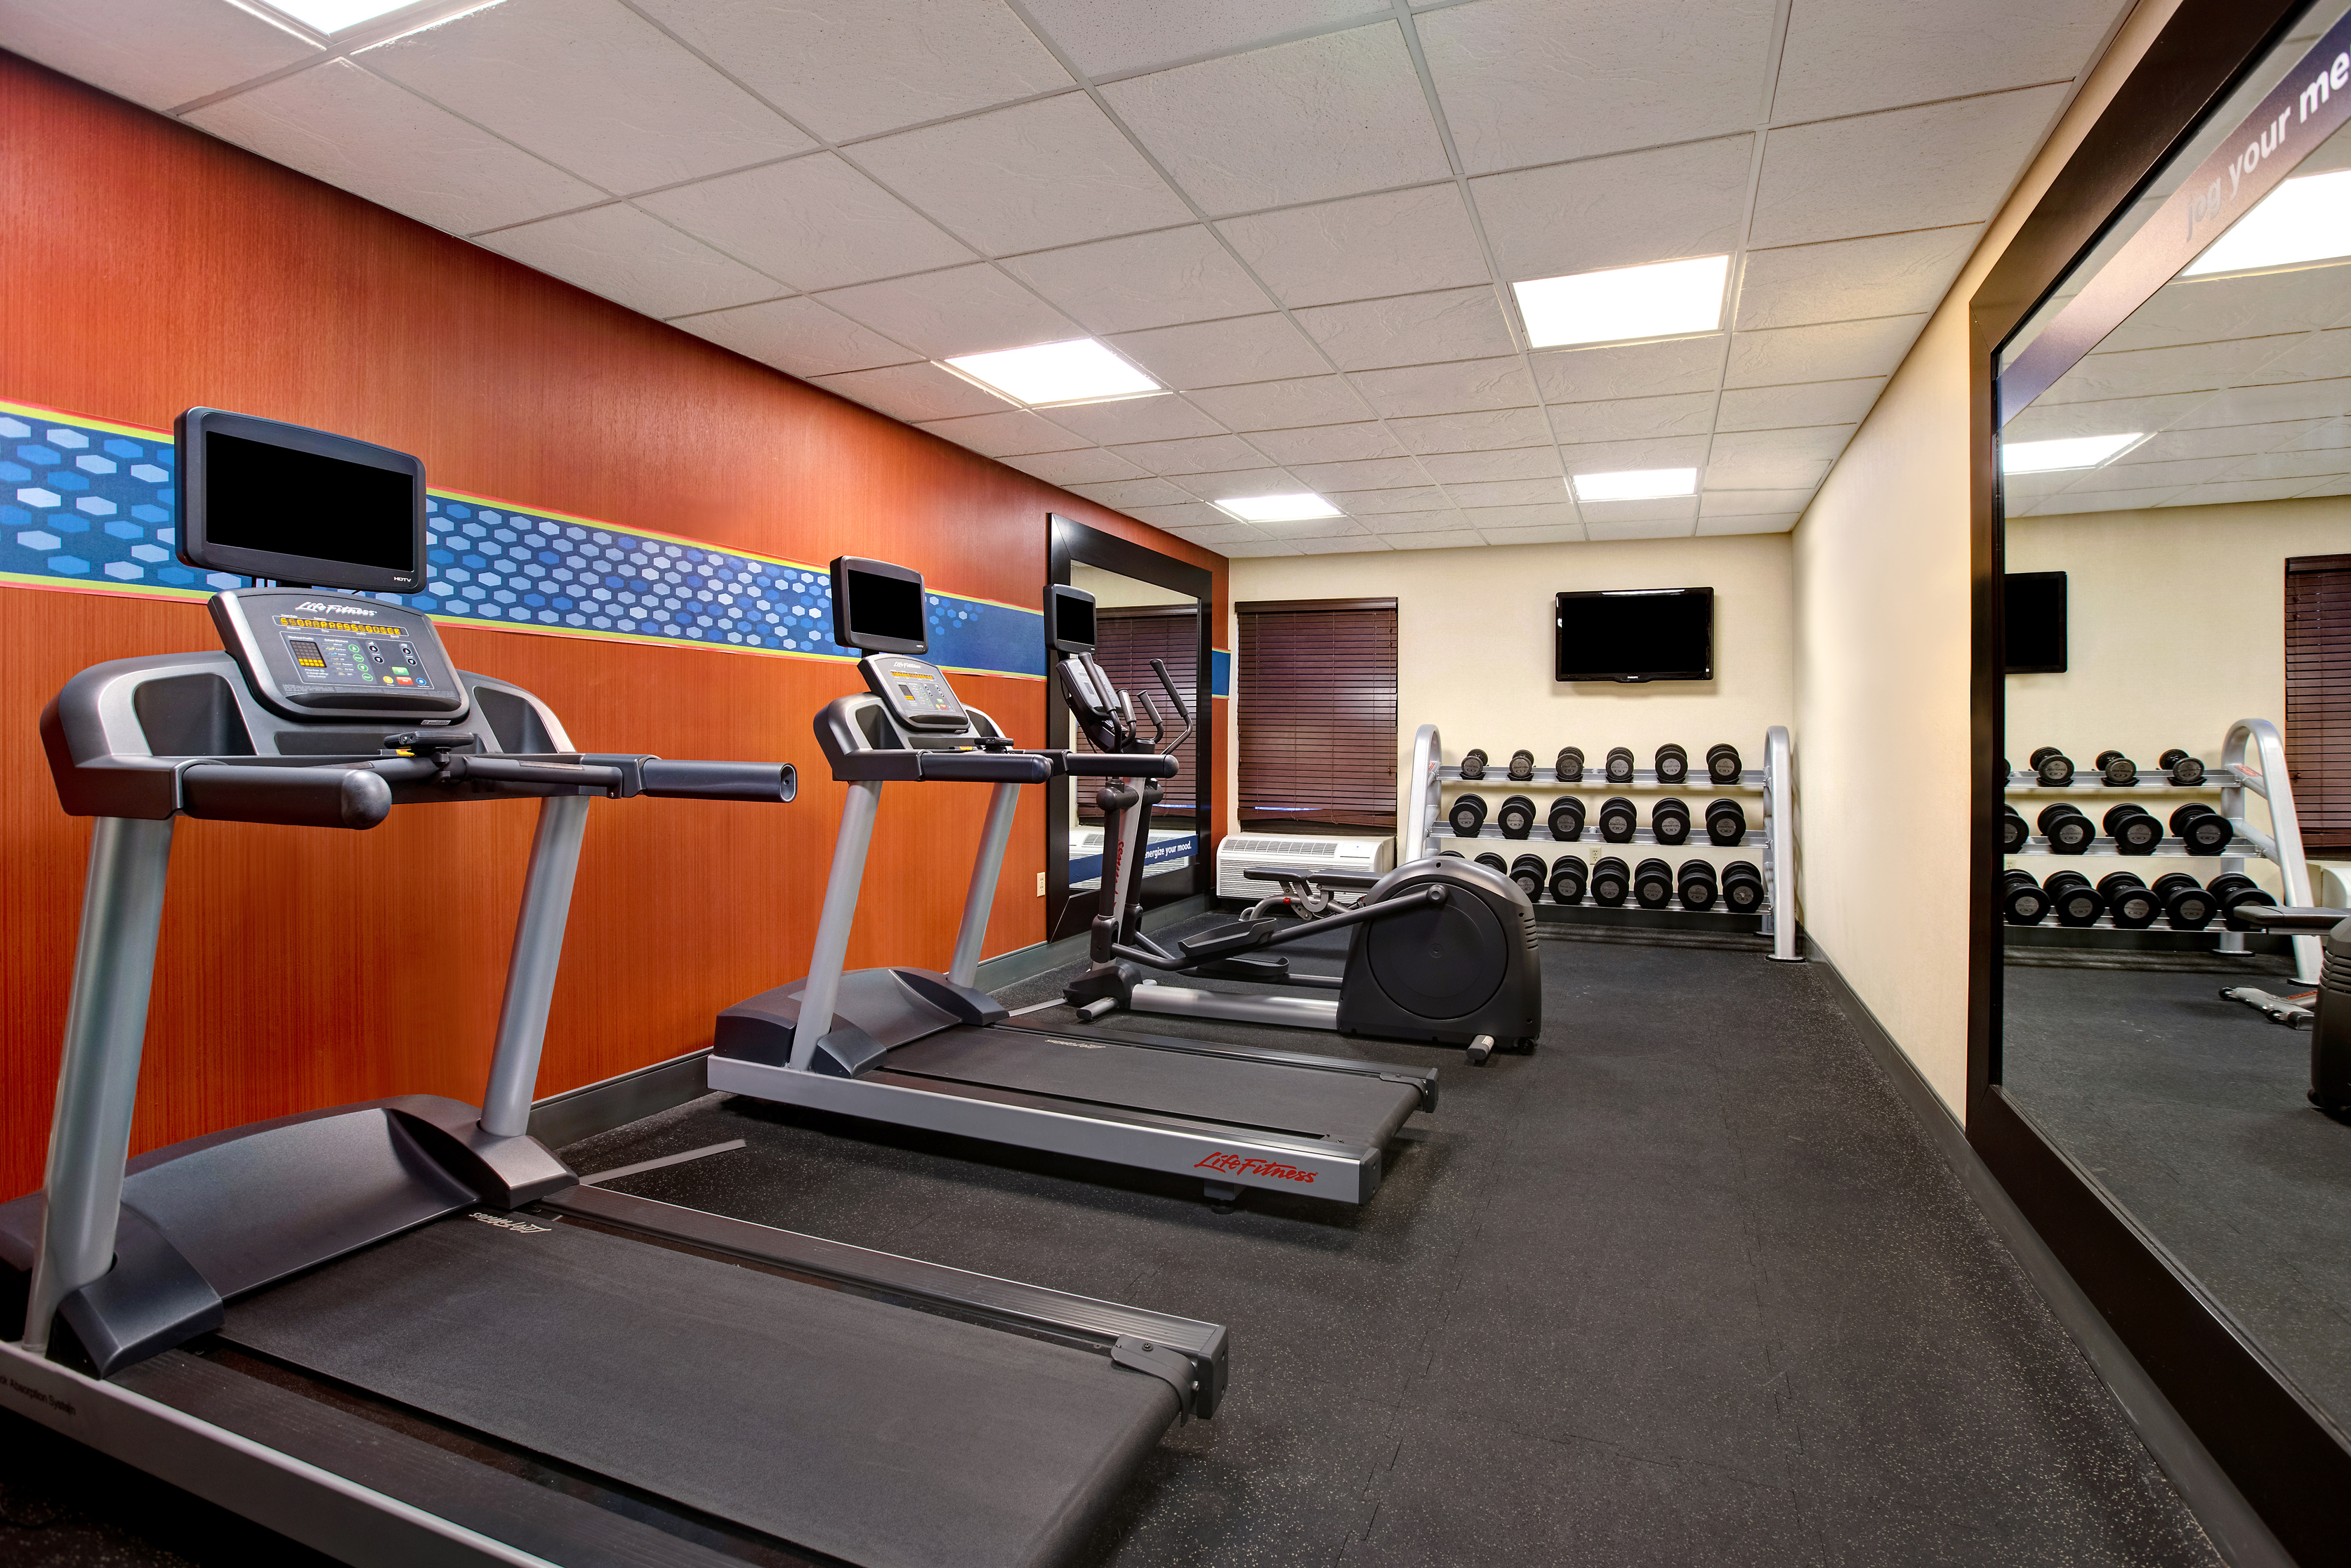 On-Site Fitness Center, Treadmills, Free Weights